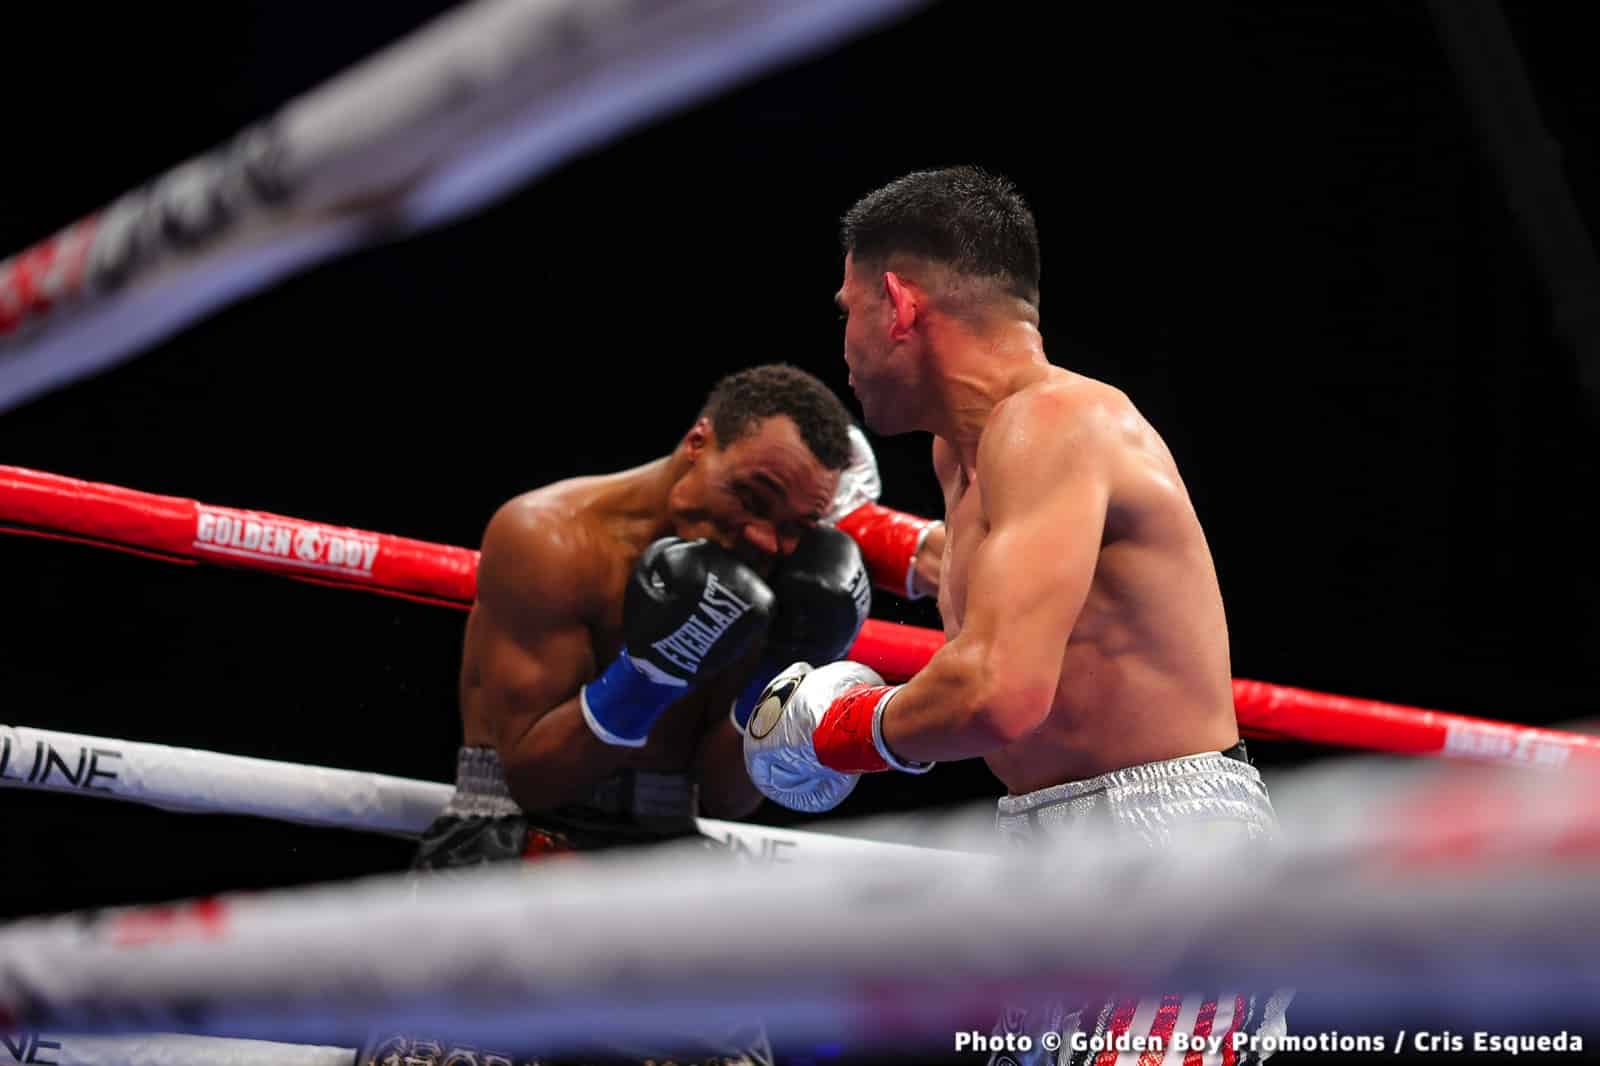 Photos: Lex” Rocha Secures Jaw-dropping KO of Ashie